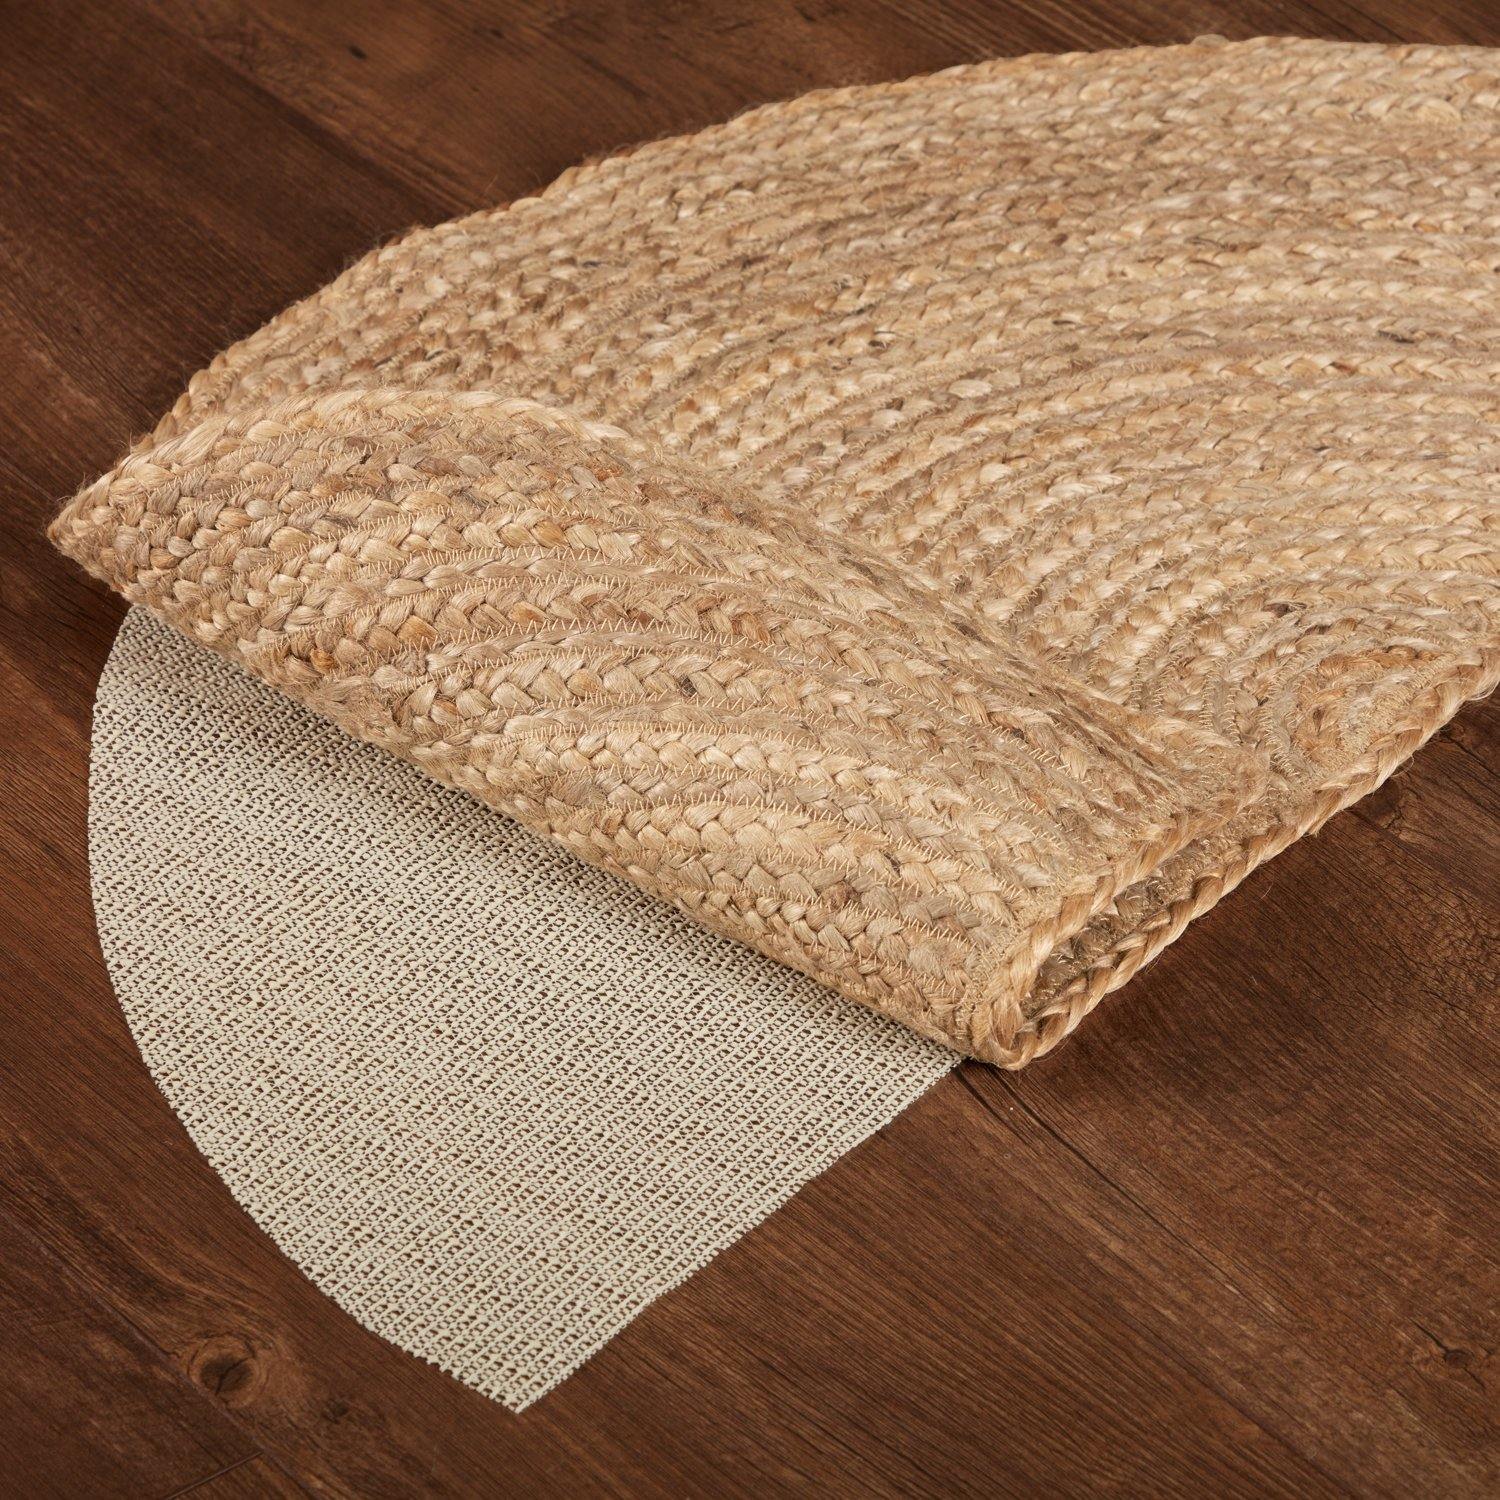 Natural Jute Braided Rug Half Circle 16.5"x33" with Rug Pad VHC Brands - The Fox Decor